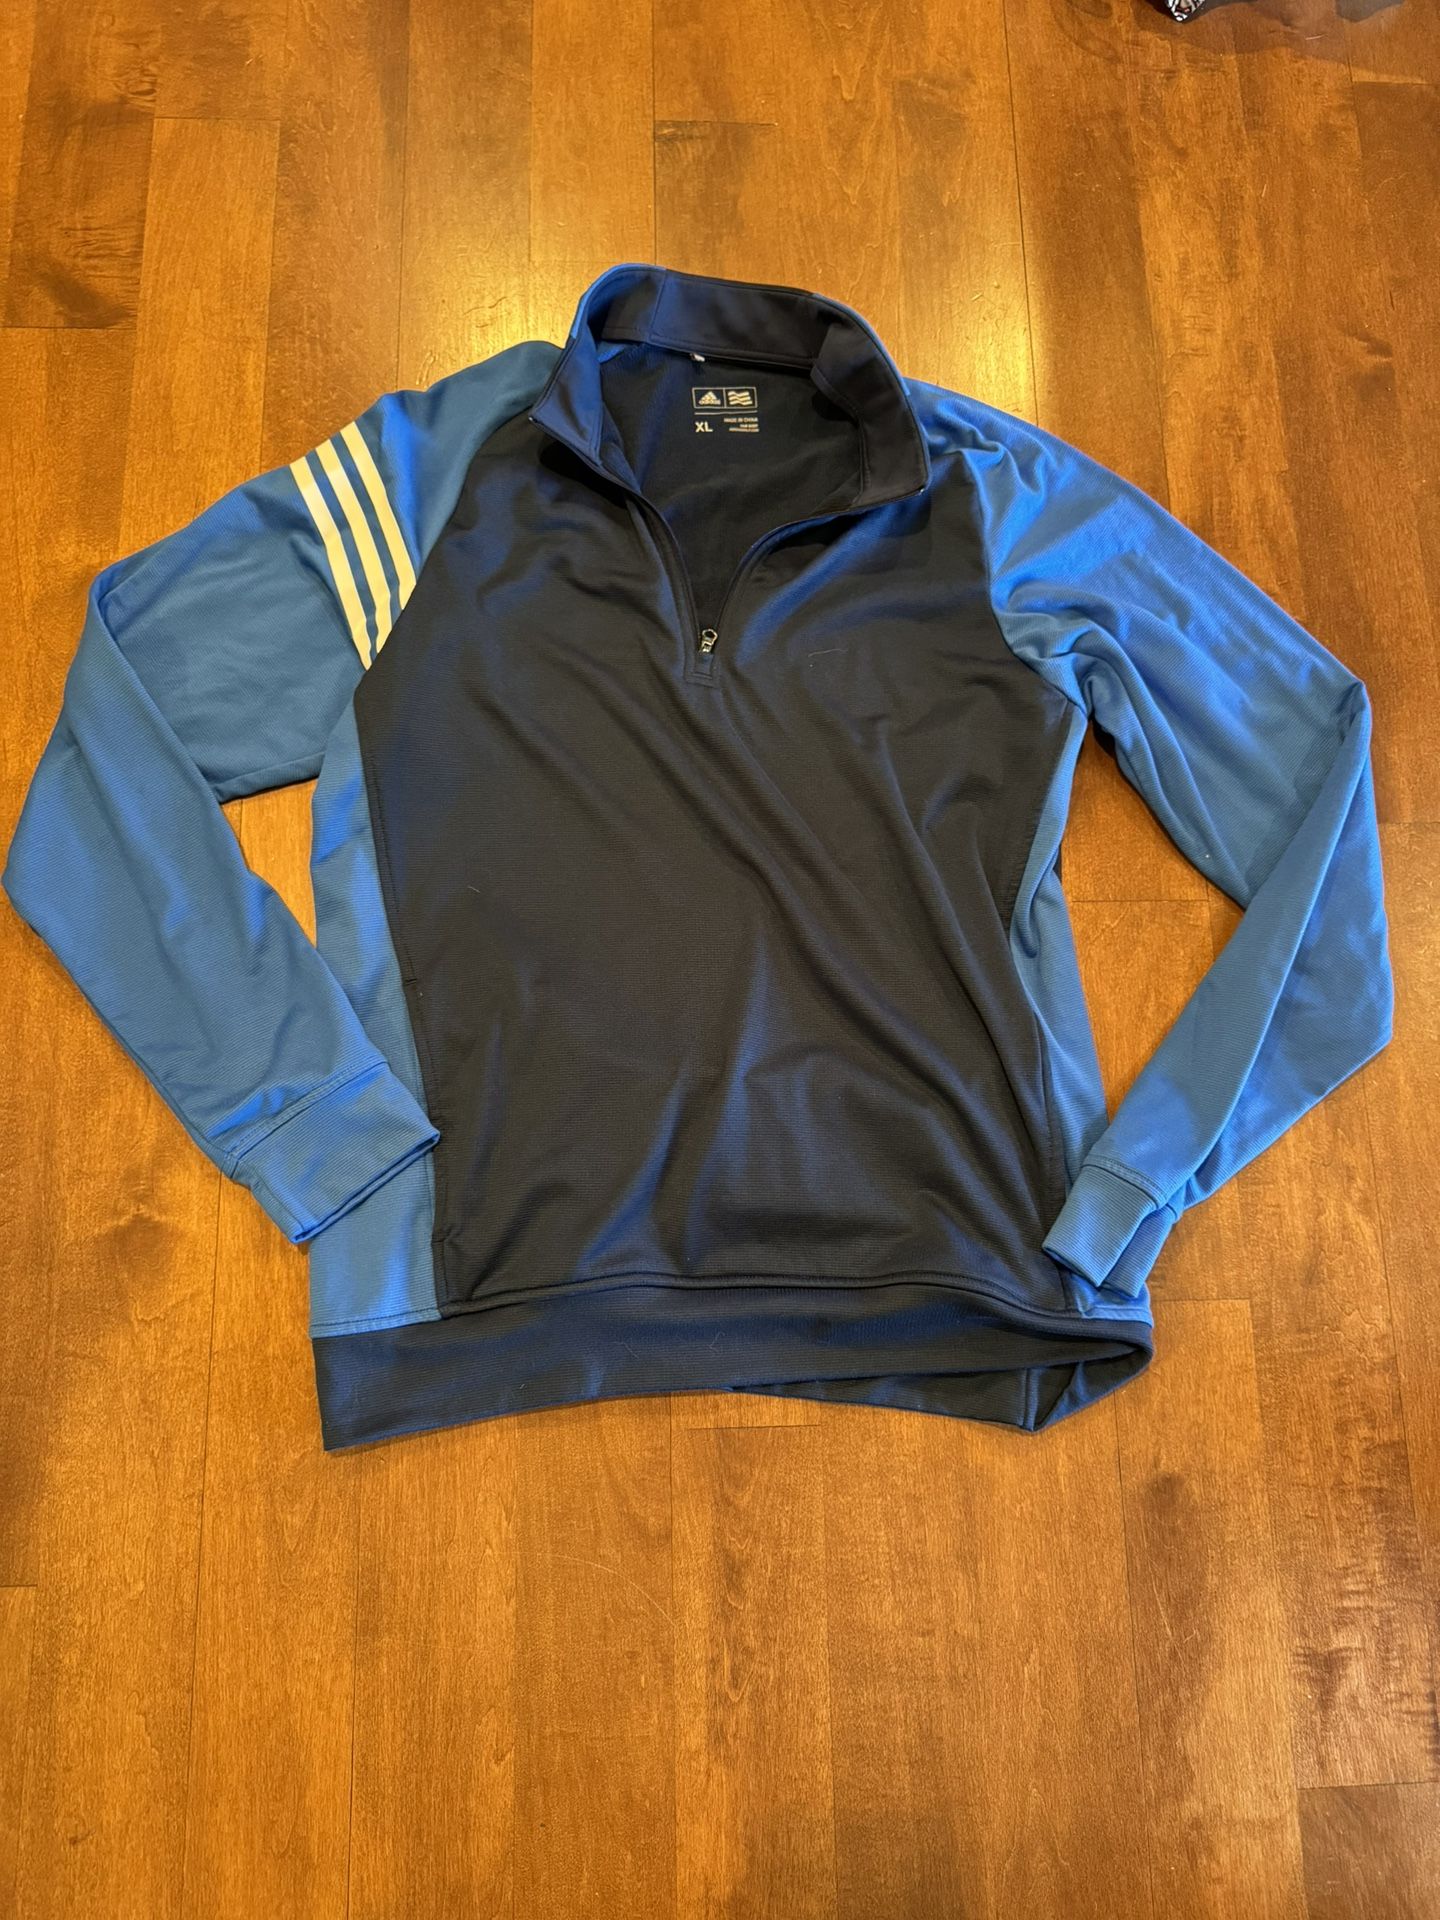 Mens Adidas Quarter Zip Shipping Available 